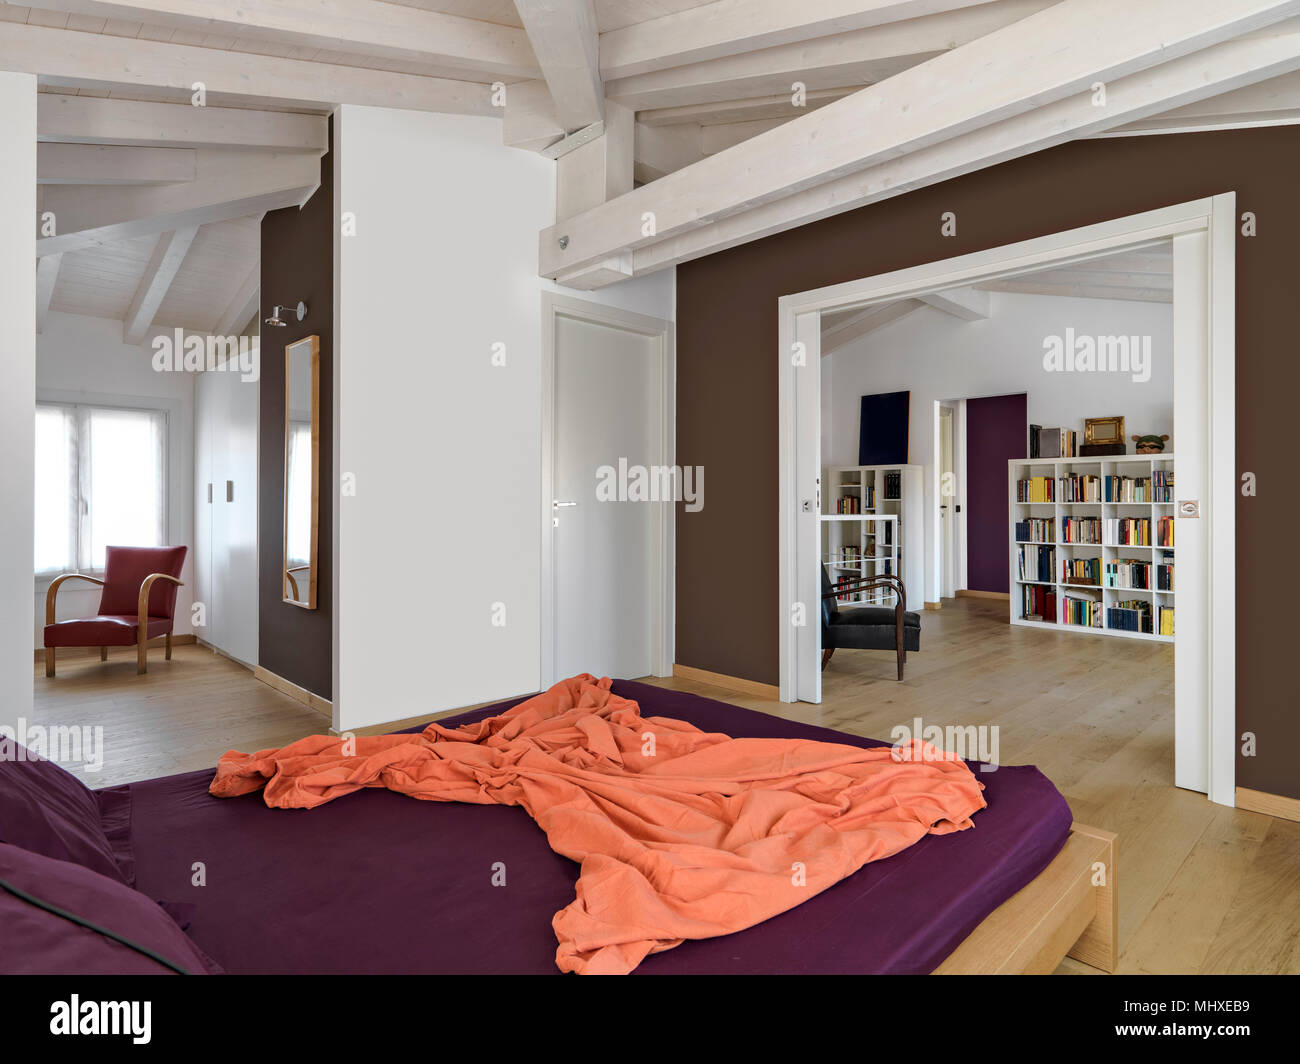 Interiors Shots Of A Modern Bedroom In The Attic Room With